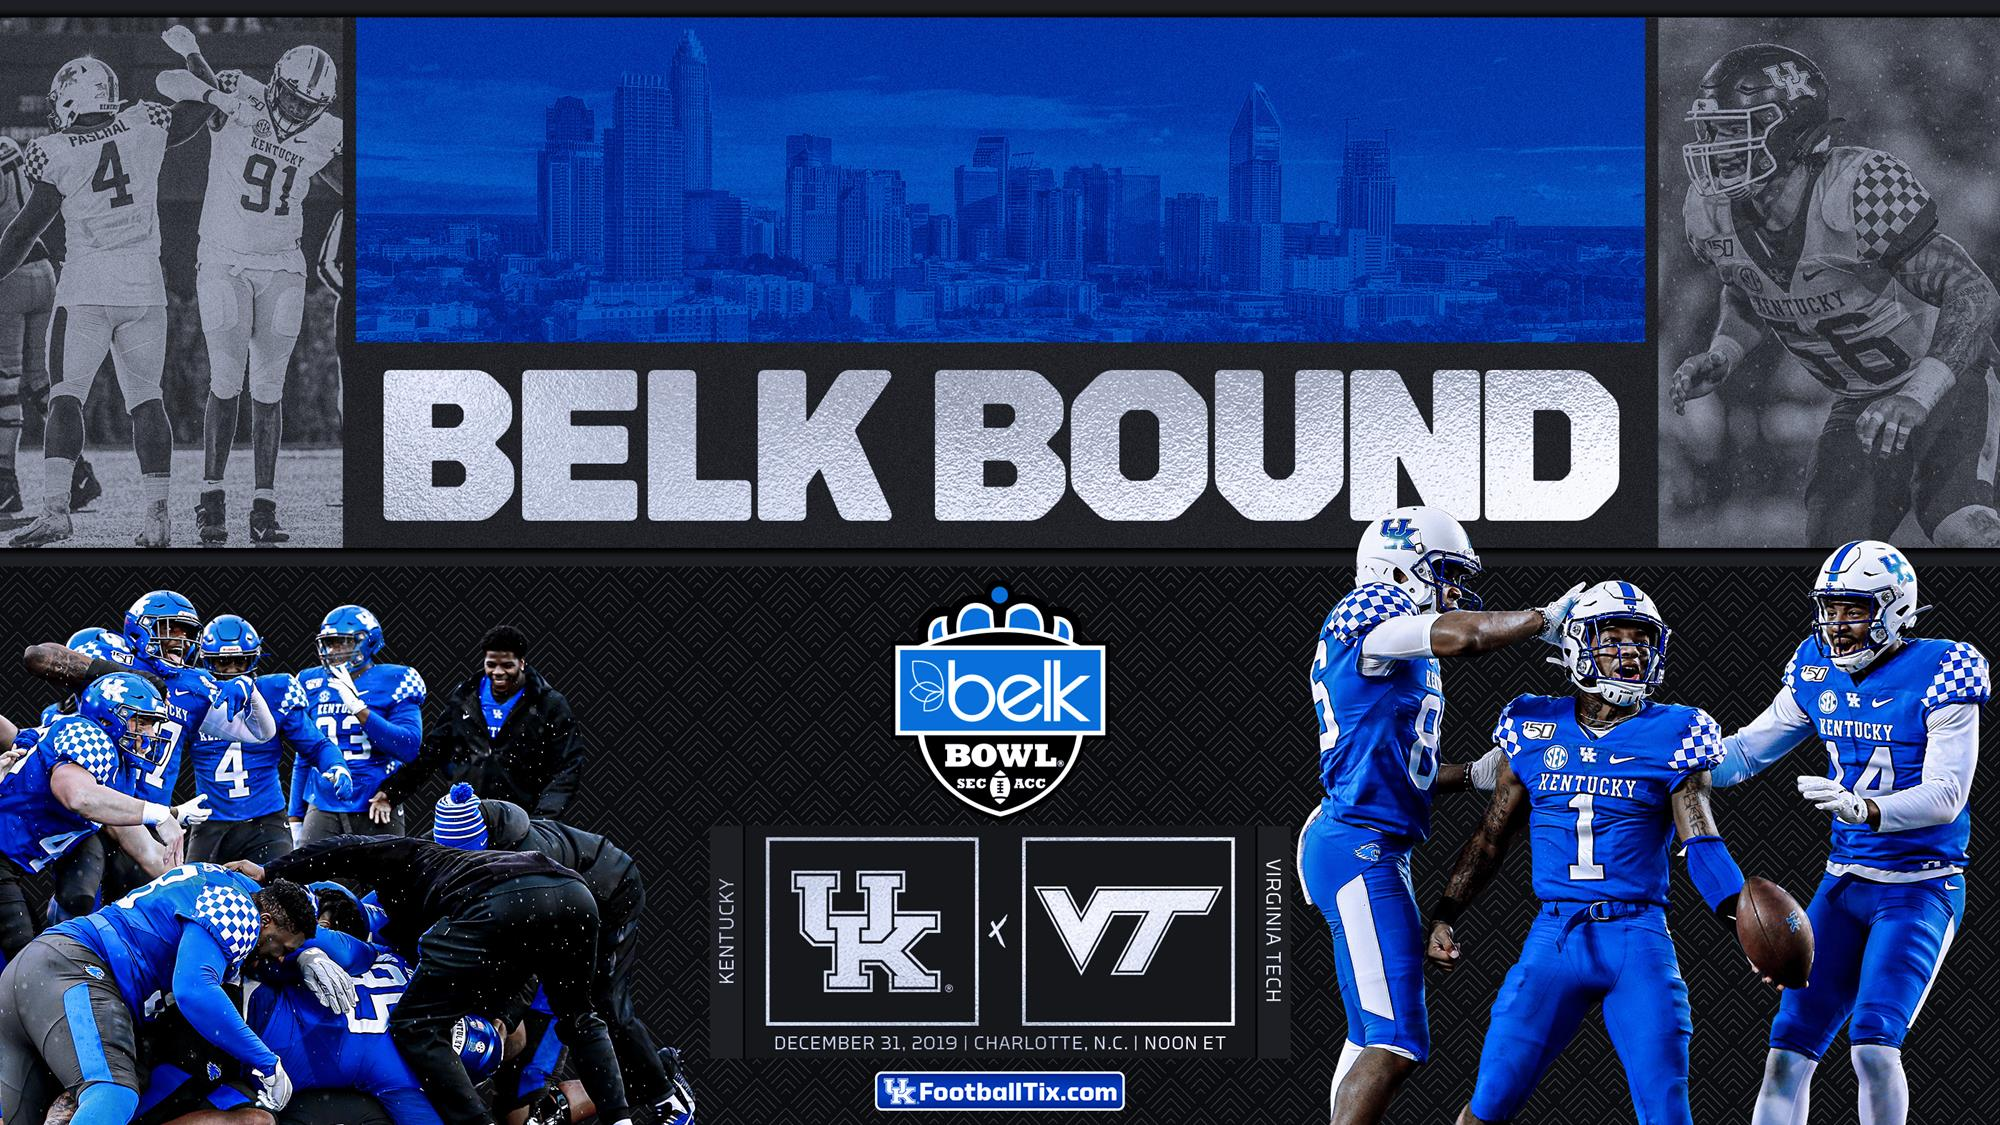 Belk Bowl Preview Show is Monday Night at 6:00